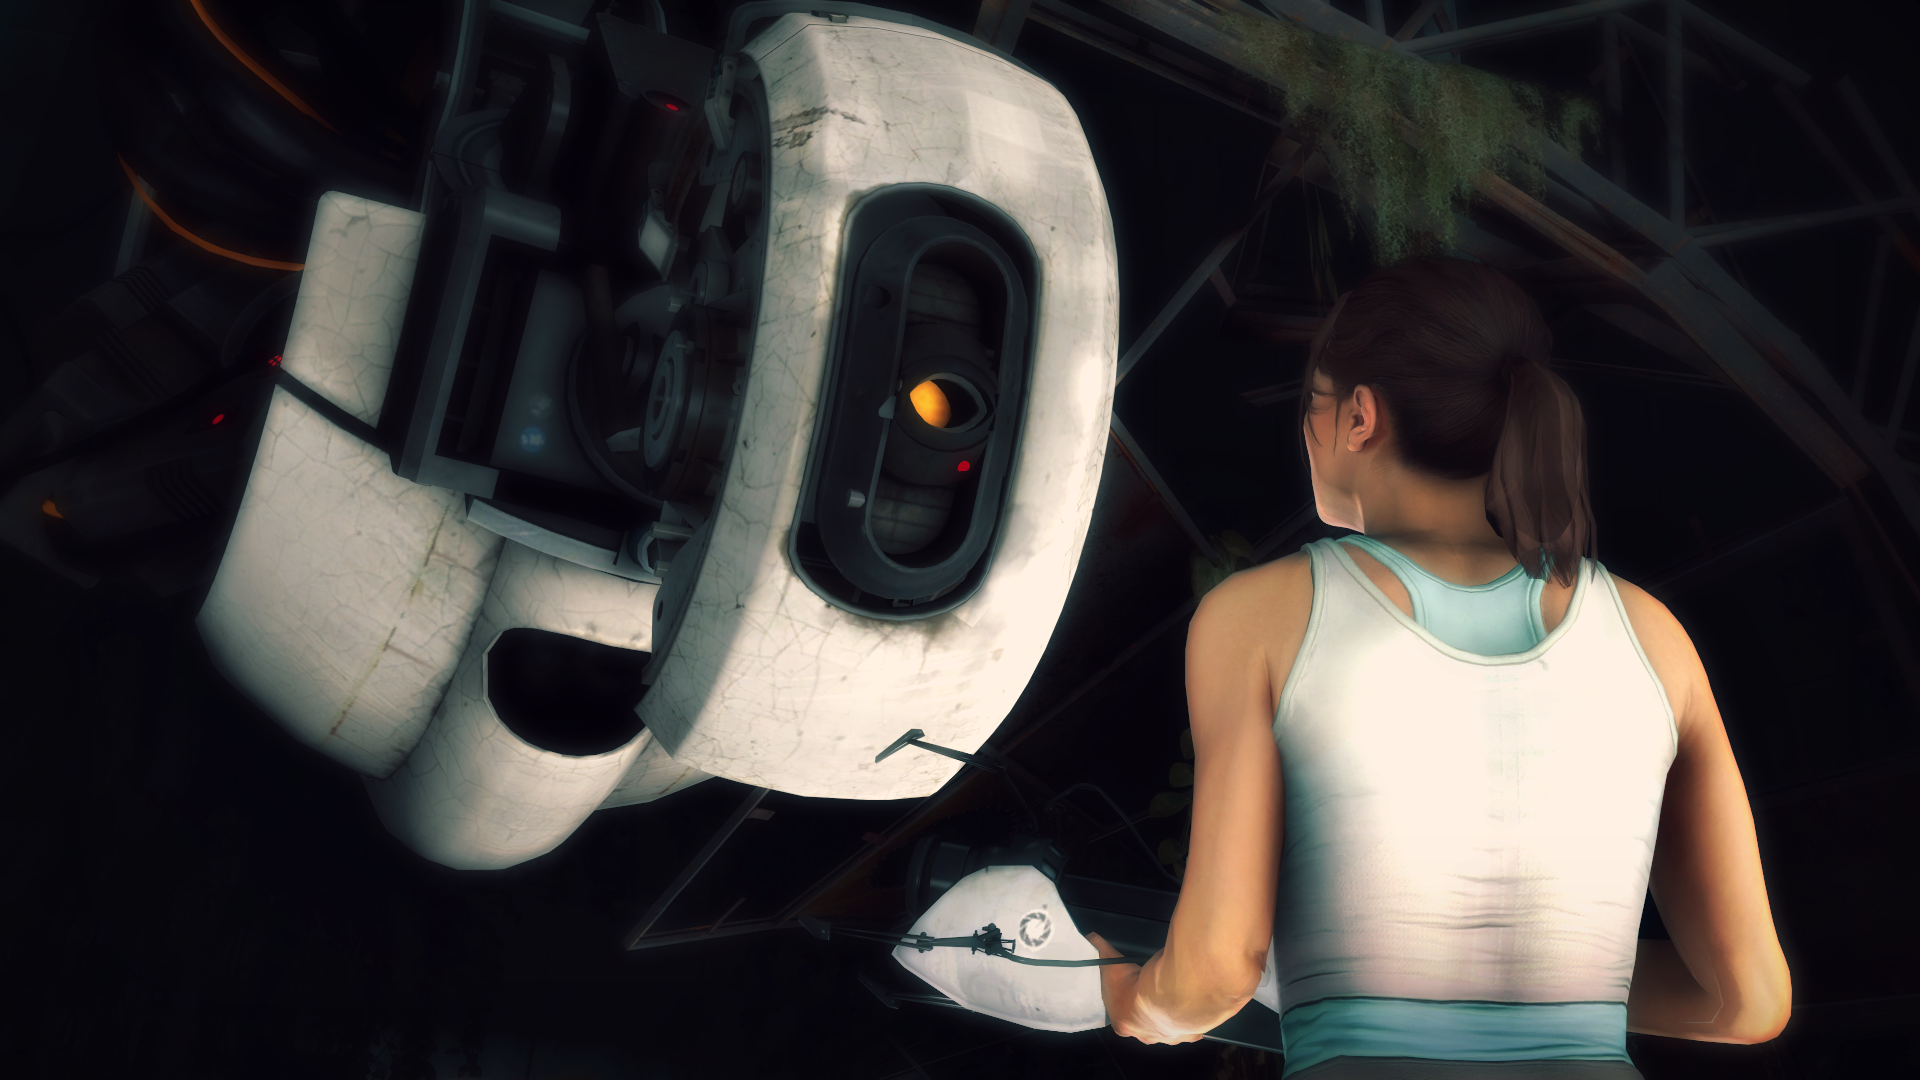 General 1920x1080 Portal (game) GLaDOS Chell face to face video game characters